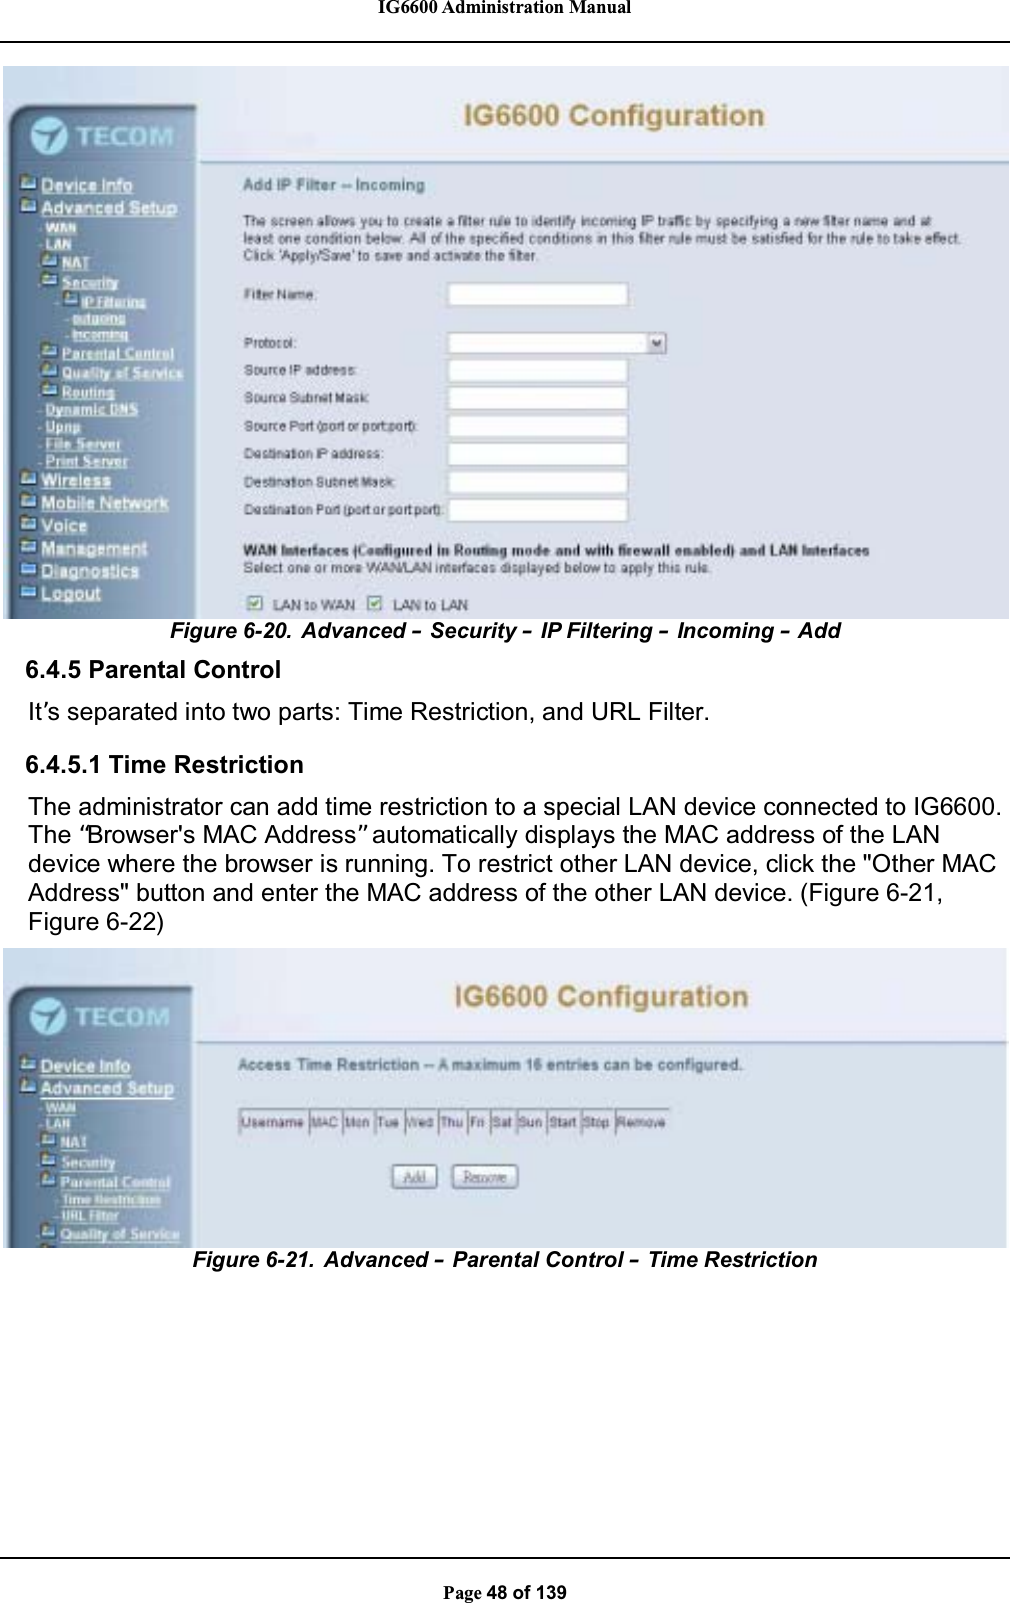 IG6600 Administration ManualPage 48 of 139Figure 6-20. Advanced –Security –IP Filtering –Incoming –Add6.4.5 Parental ControlIt’s separated into two parts: Time Restriction, and URL Filter.6.4.5.1 Time RestrictionThe administrator can add time restriction to a special LAN device connected to IG6600.The “Browser&apos;s MAC Address”automatically displays the MAC address of the LANdevice where the browser is running. To restrict other LAN device, click the &quot;Other MACAddress&quot; button and enter the MAC address of the other LAN device. (Figure 6-21,Figure 6-22)Figure 6-21. Advanced –Parental Control –Time Restriction